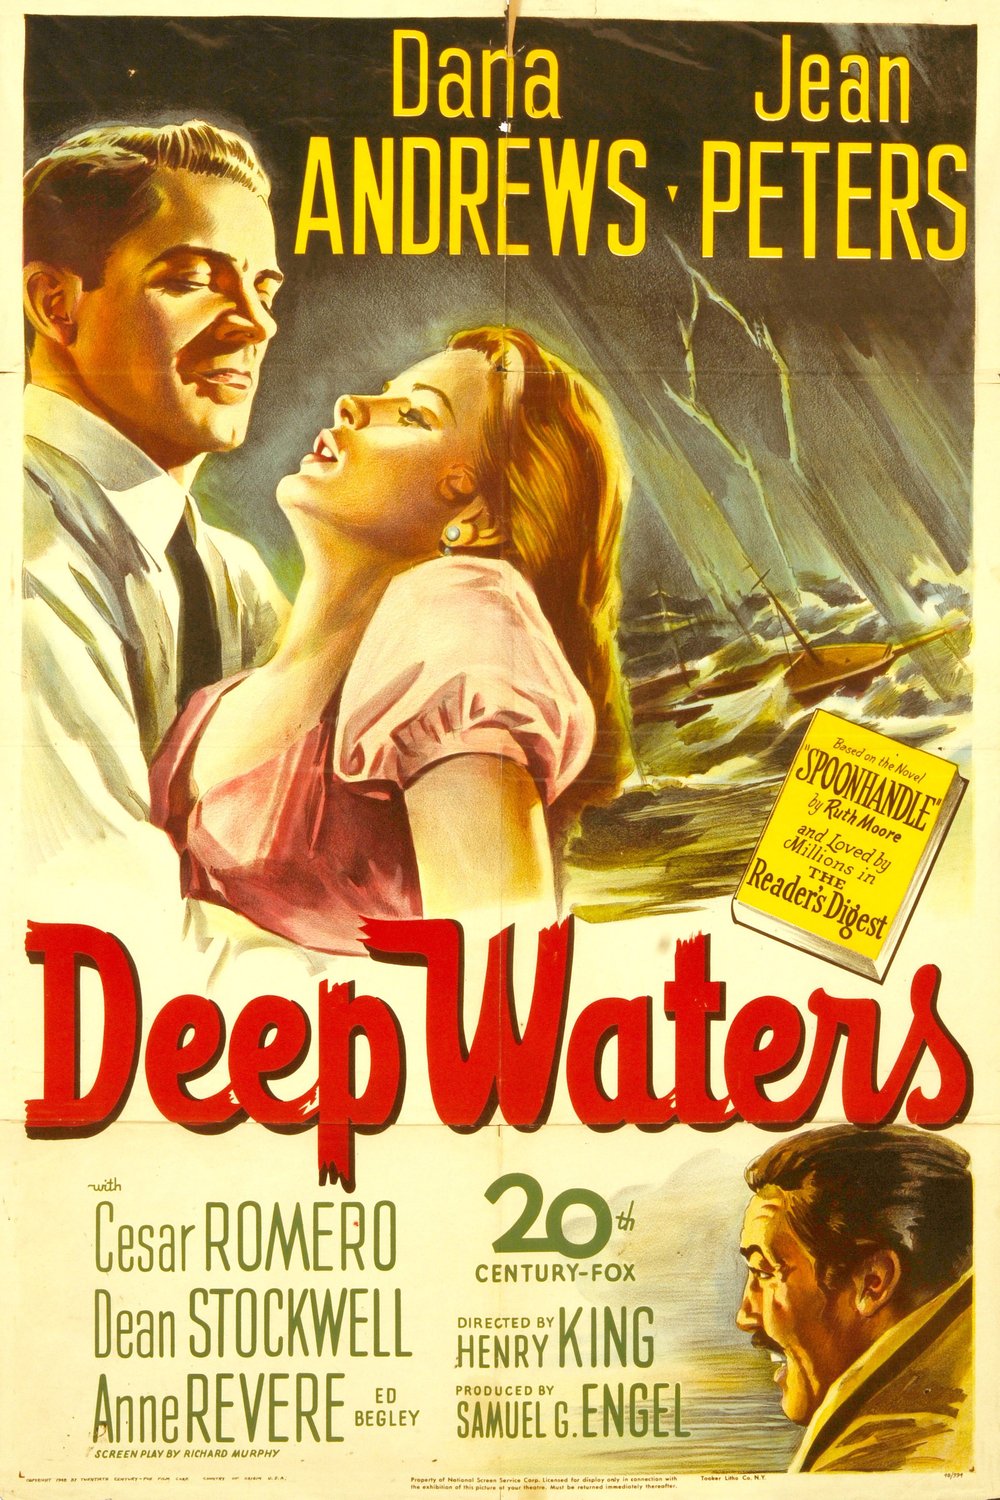 Poster of the movie Deep Waters